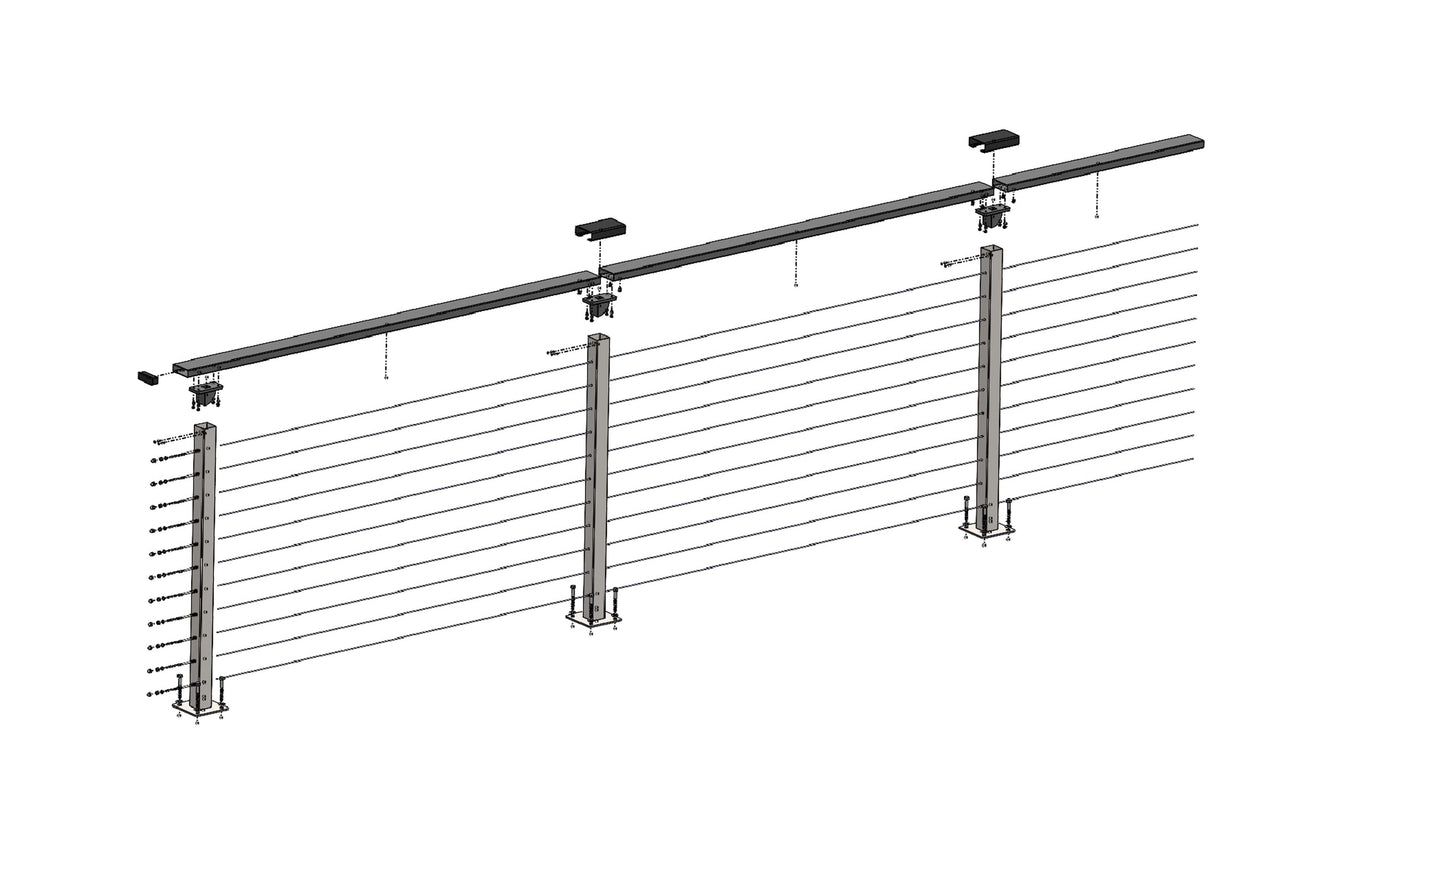 24 ft. x 42 in. Black Deck Cable Railing, Base Mount , Stainless